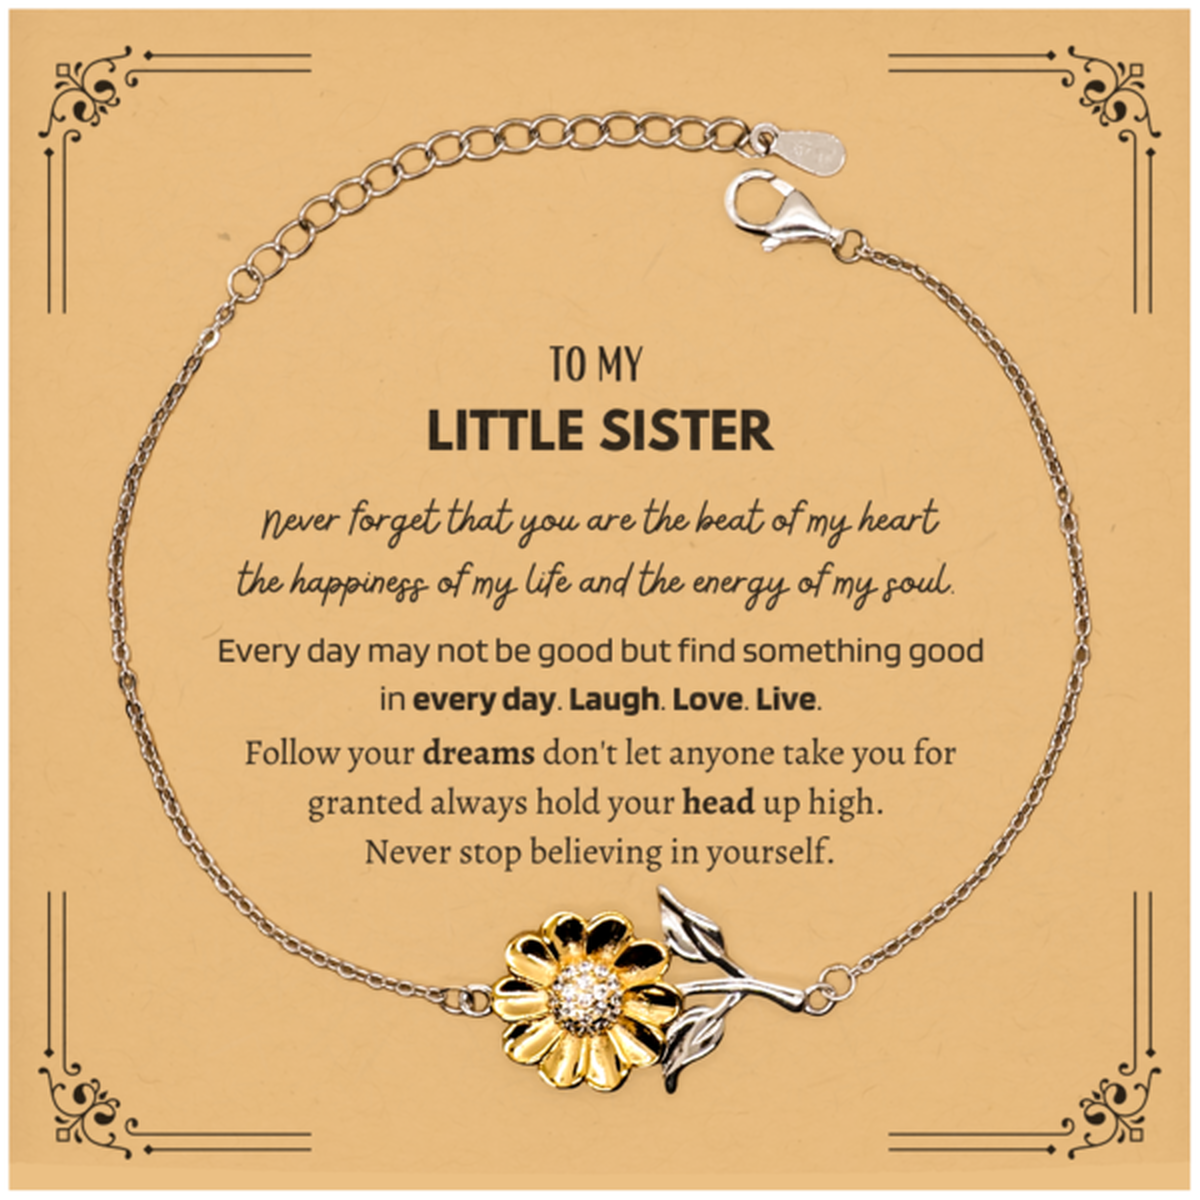 To My Little Sister Message Card Gifts, Christmas Little Sister Sunflower Bracelet Present, Birthday Unique Motivational For Little Sister, To My Little Sister Never forget that you are the beat of my heart the happiness of my life and the energy of my so